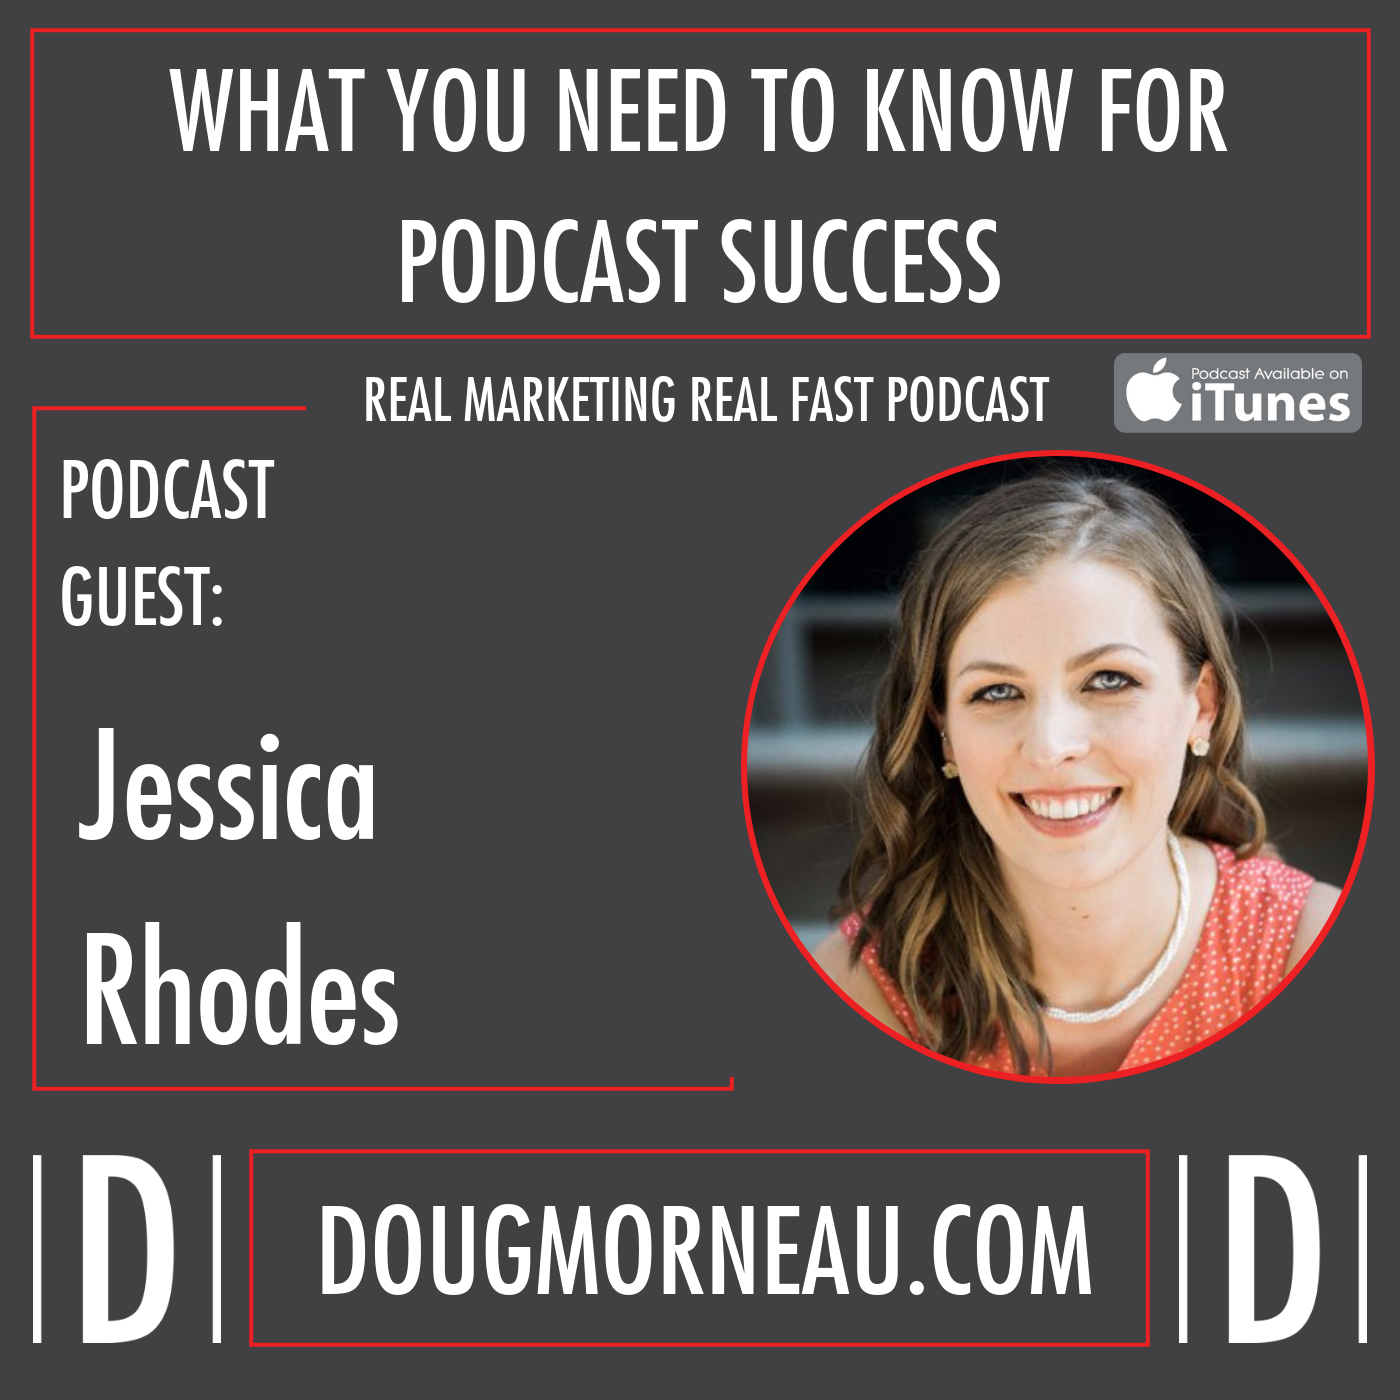 WHAT YOU NEED TO KNOW FOR PODCAST SUCCESS JESSICA RHODES - DOUG MORNEAU - REAL MARKETING REAL FAST PODCAST